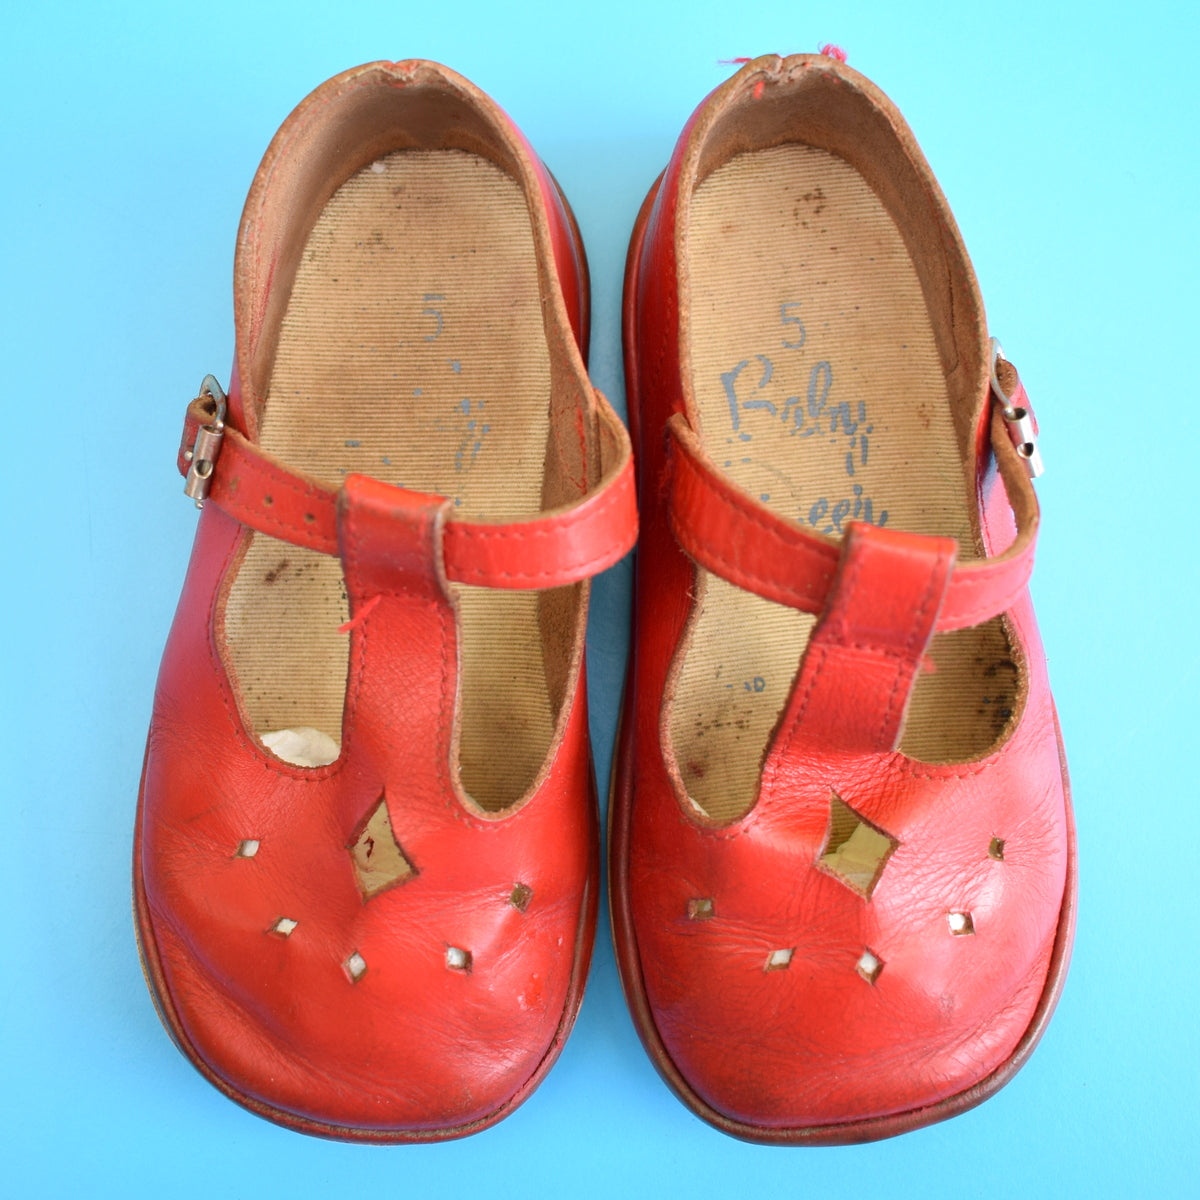 Vintage 1950s Baby Deer Baby First Shoes (Baby) - Leather Red Mary Janes Size 5